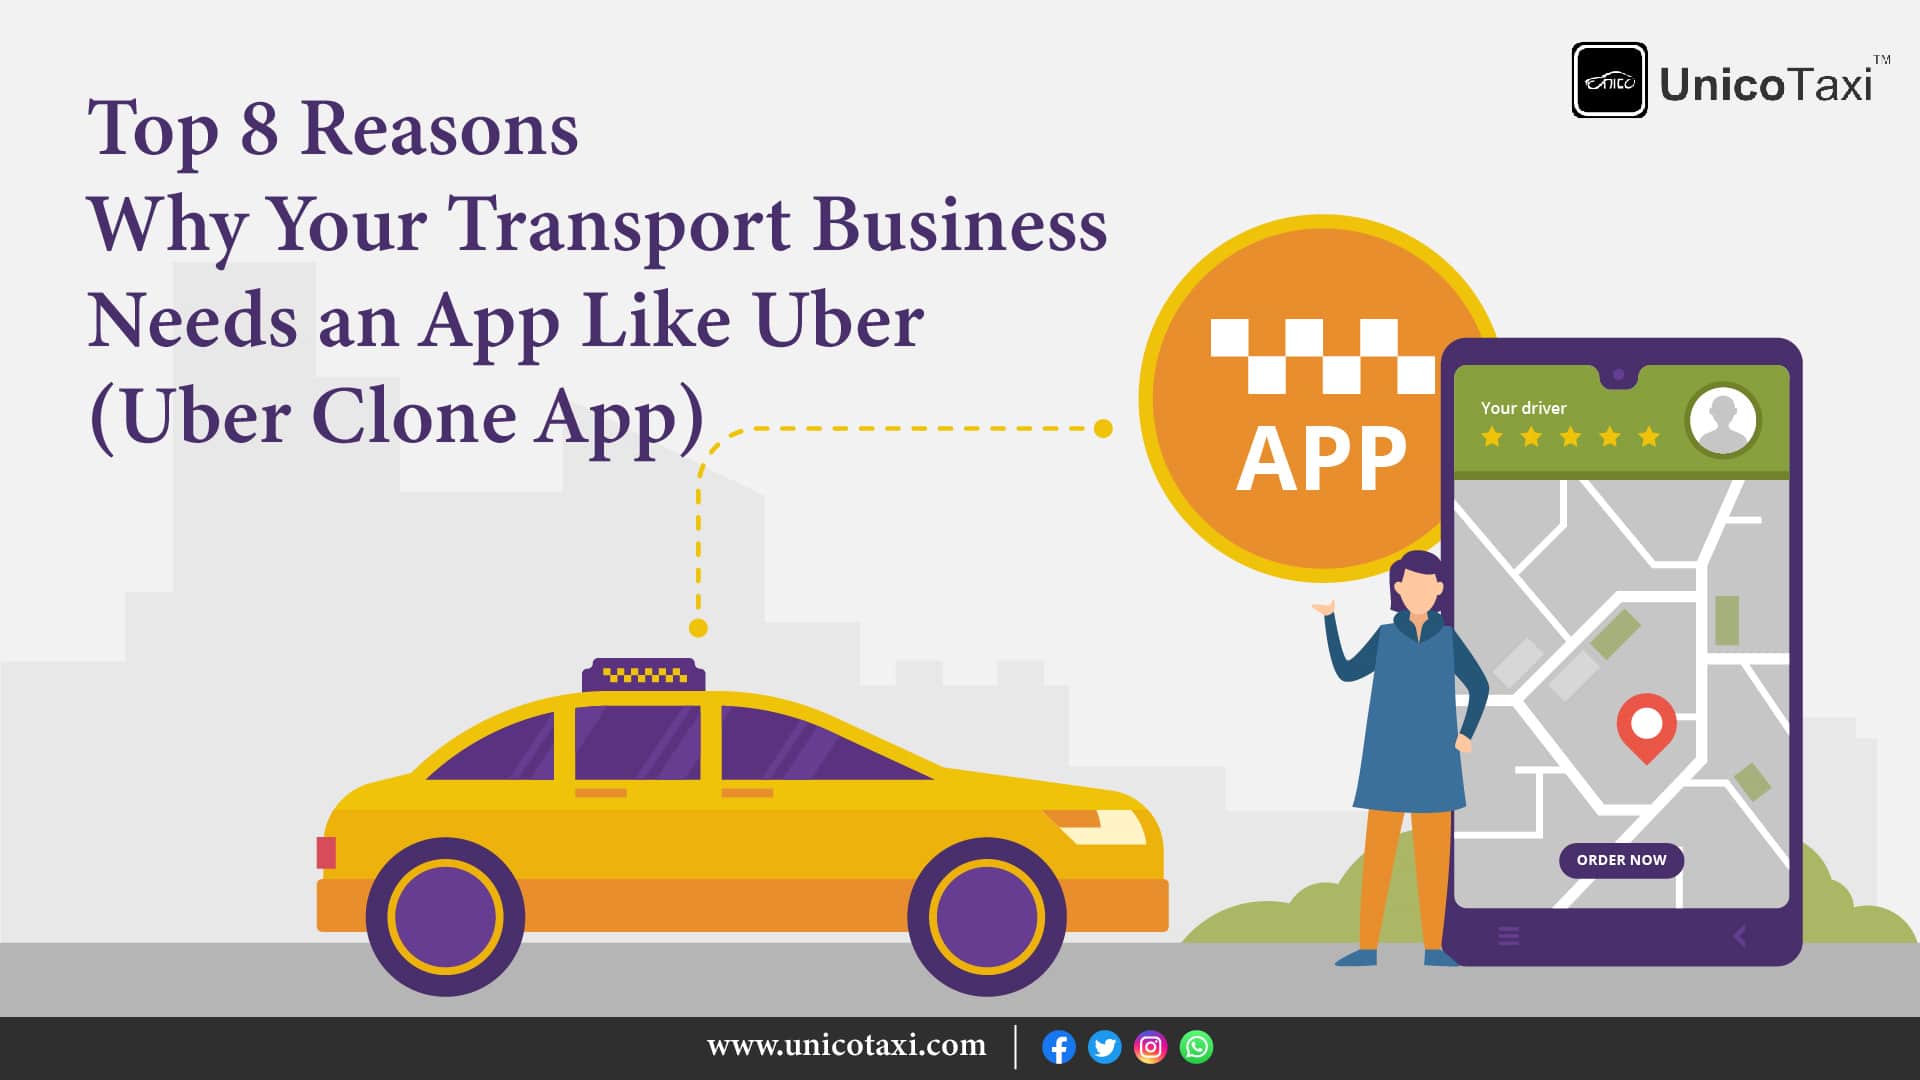 Top 8 Reasons Why Your Transport Business Needs an App Like Uber (Uber Clone)